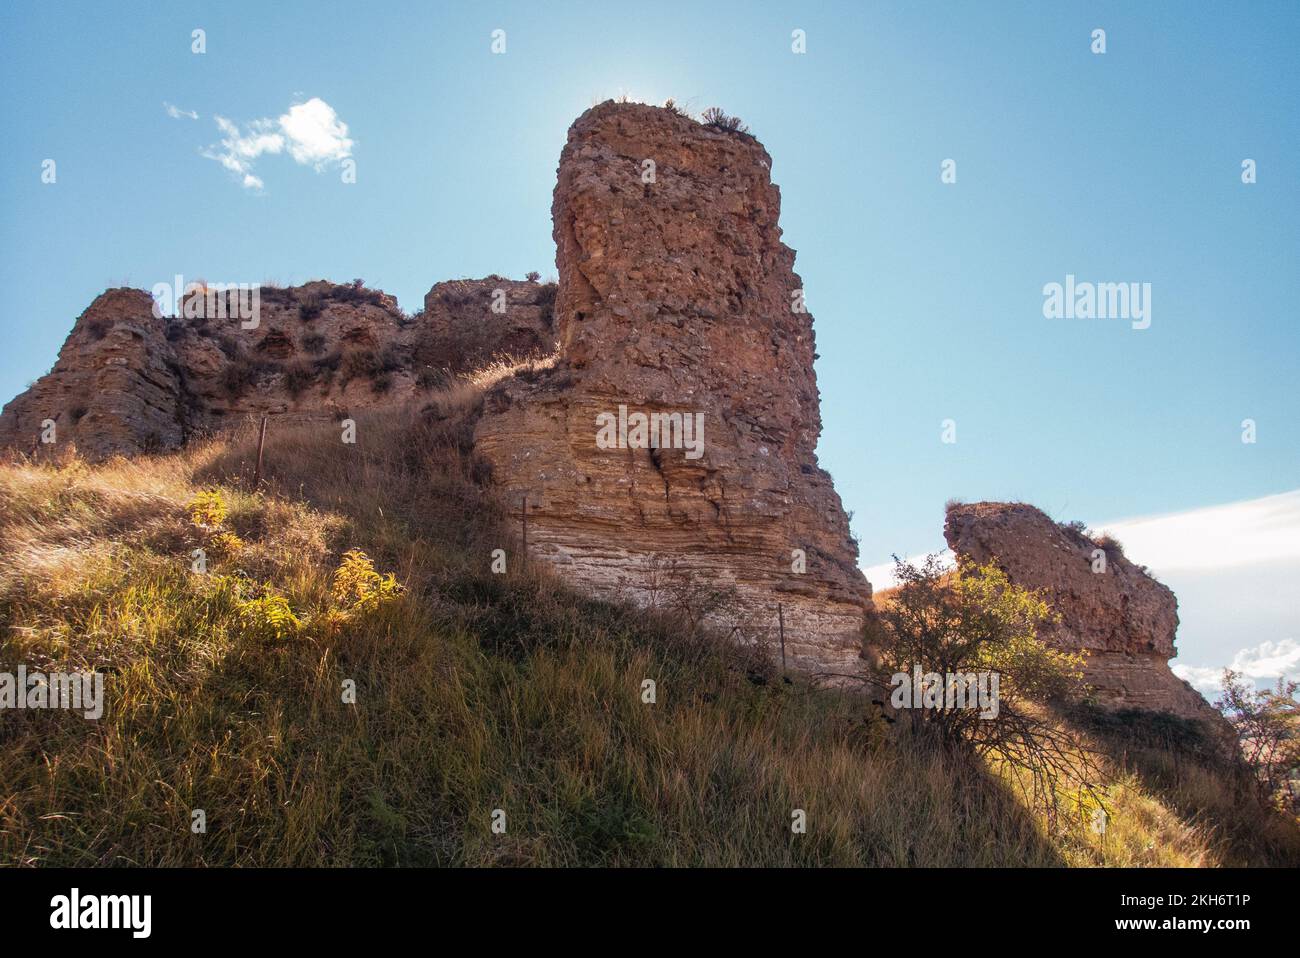 Visibly from afar: the castle hill of Belorado with its ruins of the medieval castle dominates the town at the former border between the historic kingdoms of Castile and Navarra Stock Photo